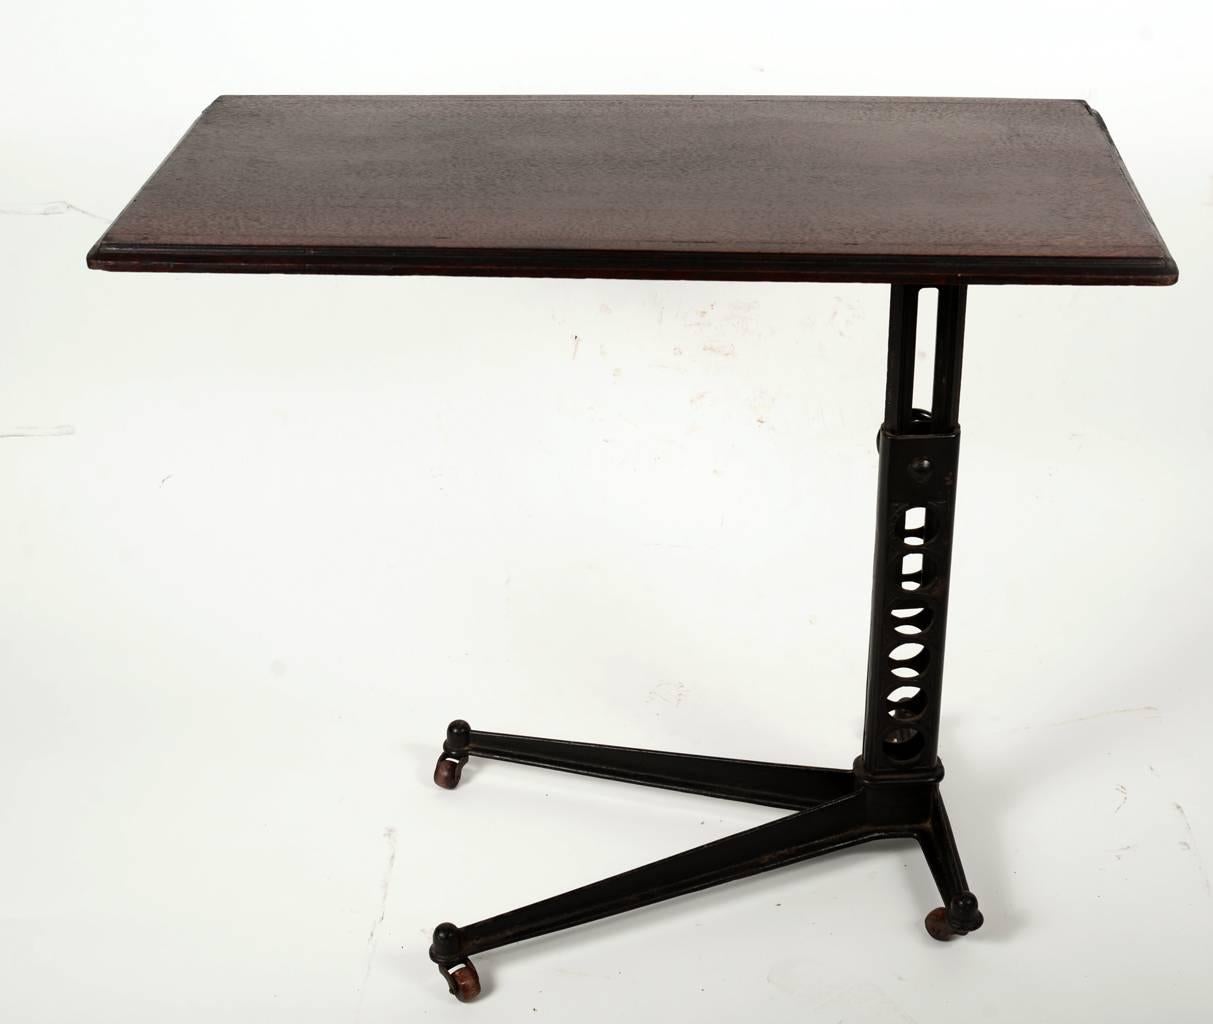 Early century adjustable height workstation with wood top and wood casters. The wood top of this piece rotates 90 degrees and the height of this table adjusts from 24"-34".